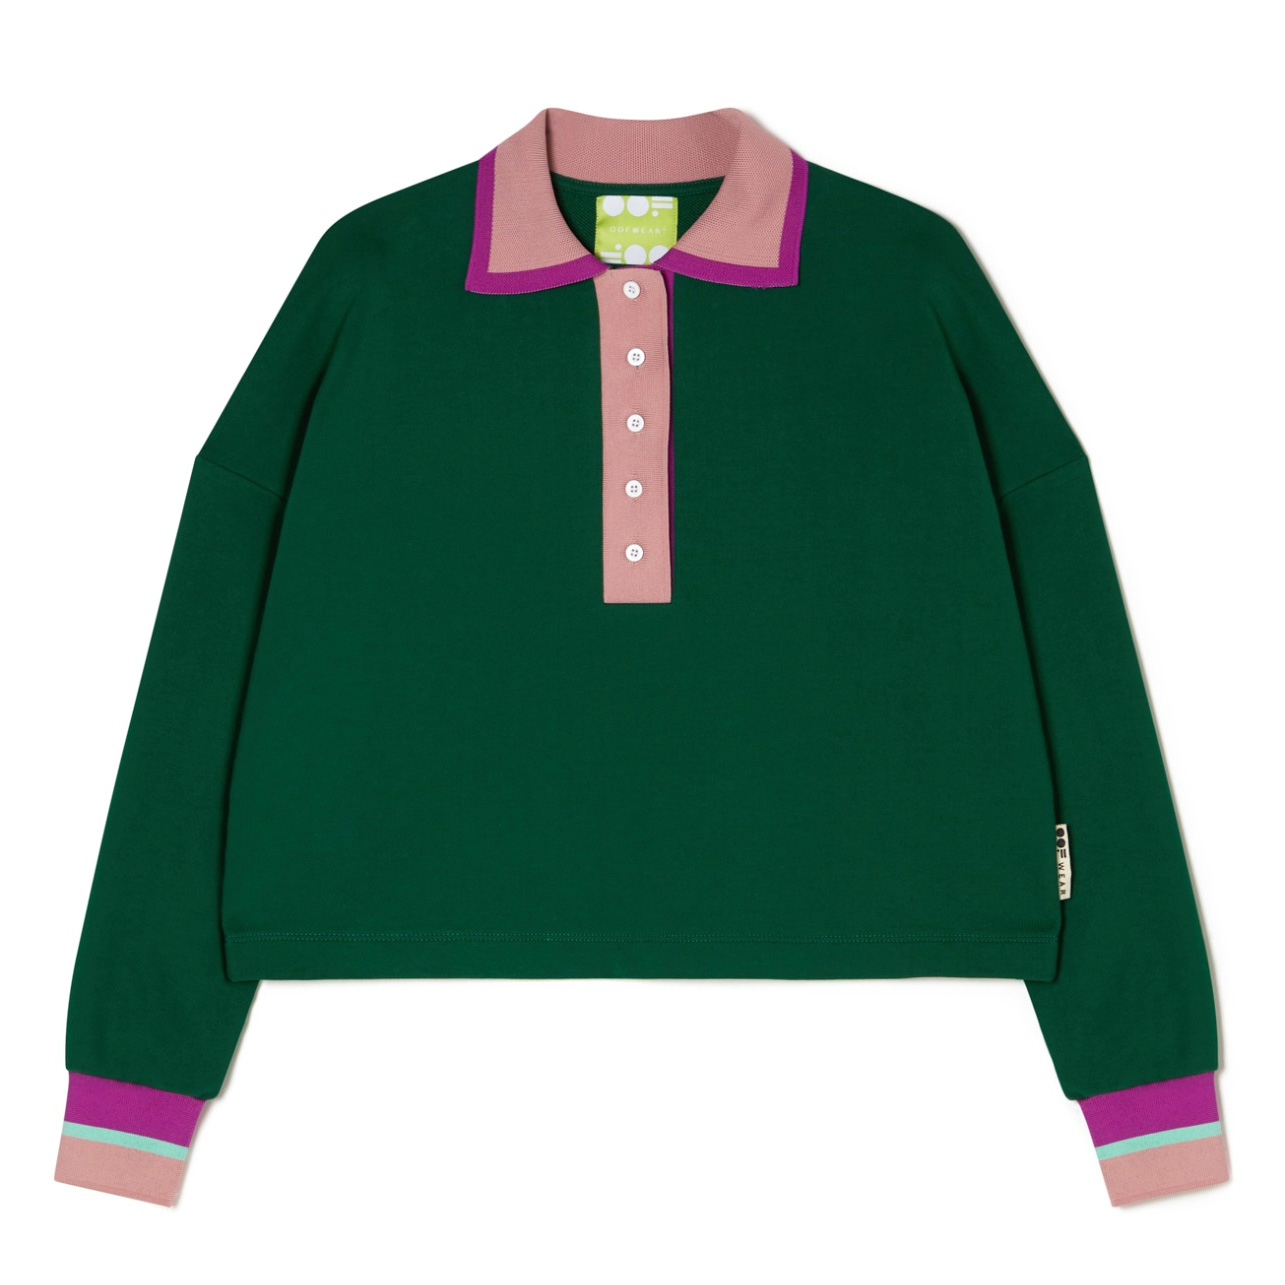 OOF WEAR Sweatshirt with Knitted Collar 4027